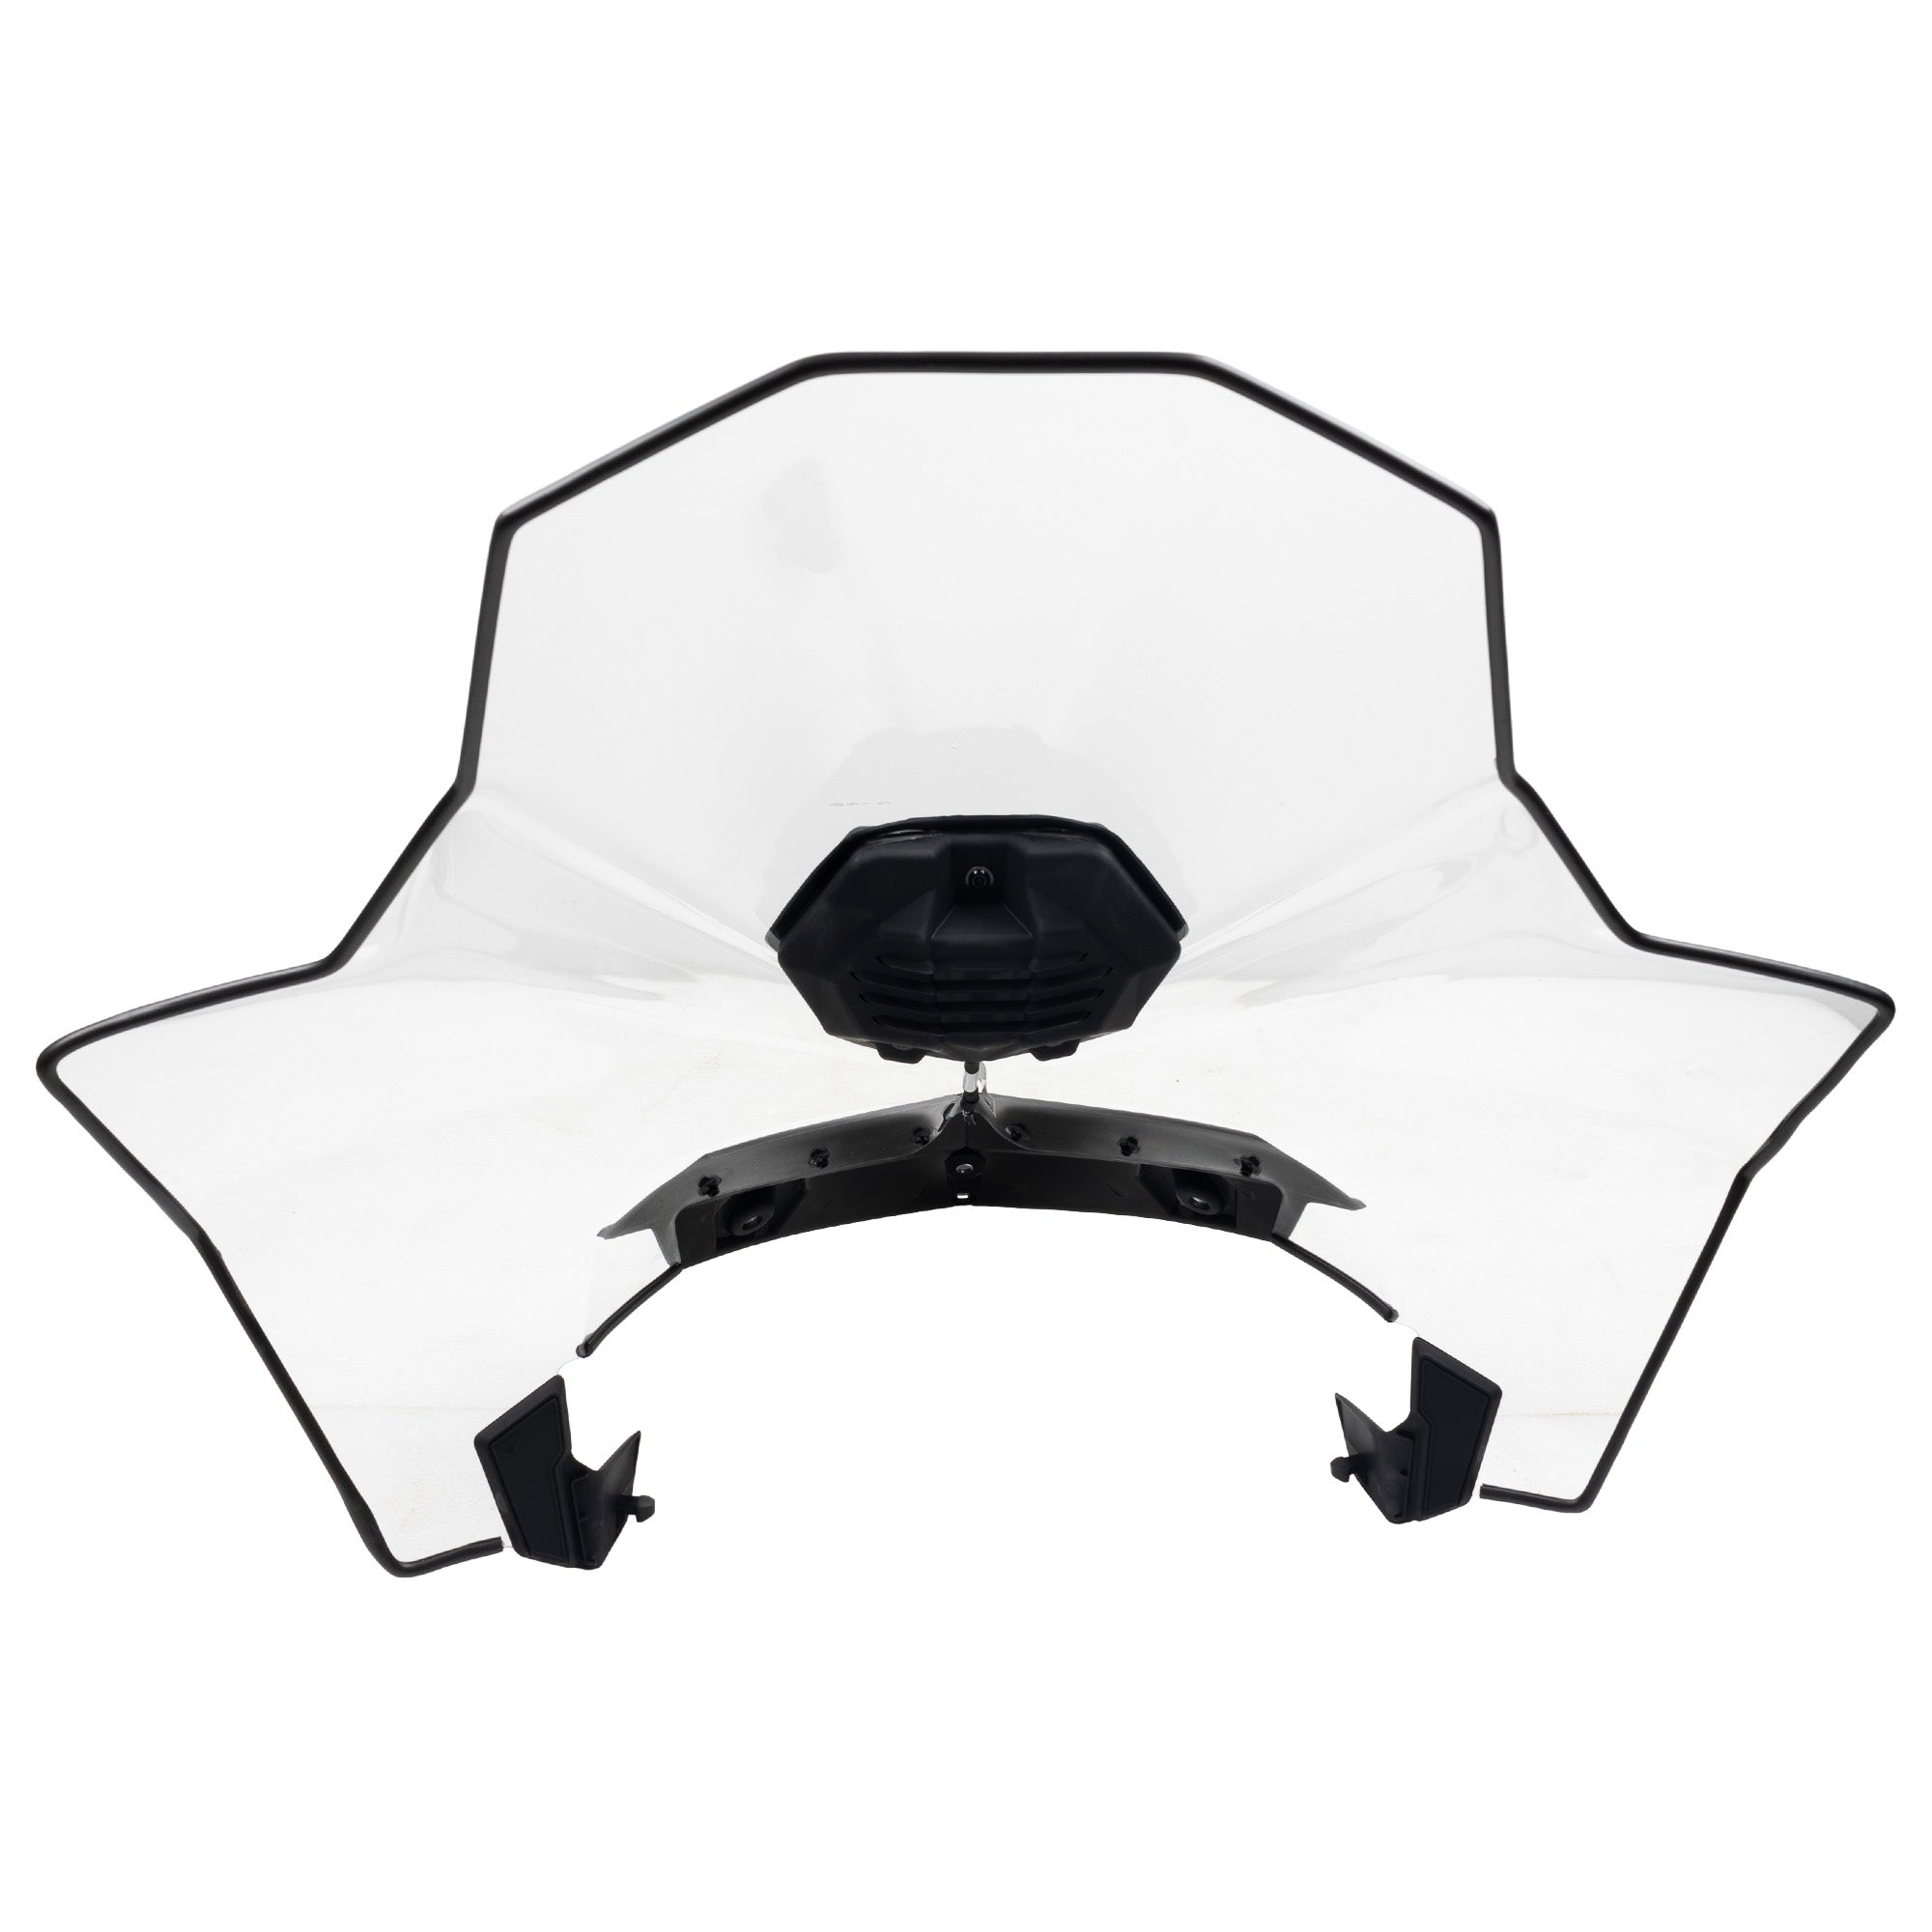 Polaris Extra Tall Windshield with Integrated Center Light 2890642